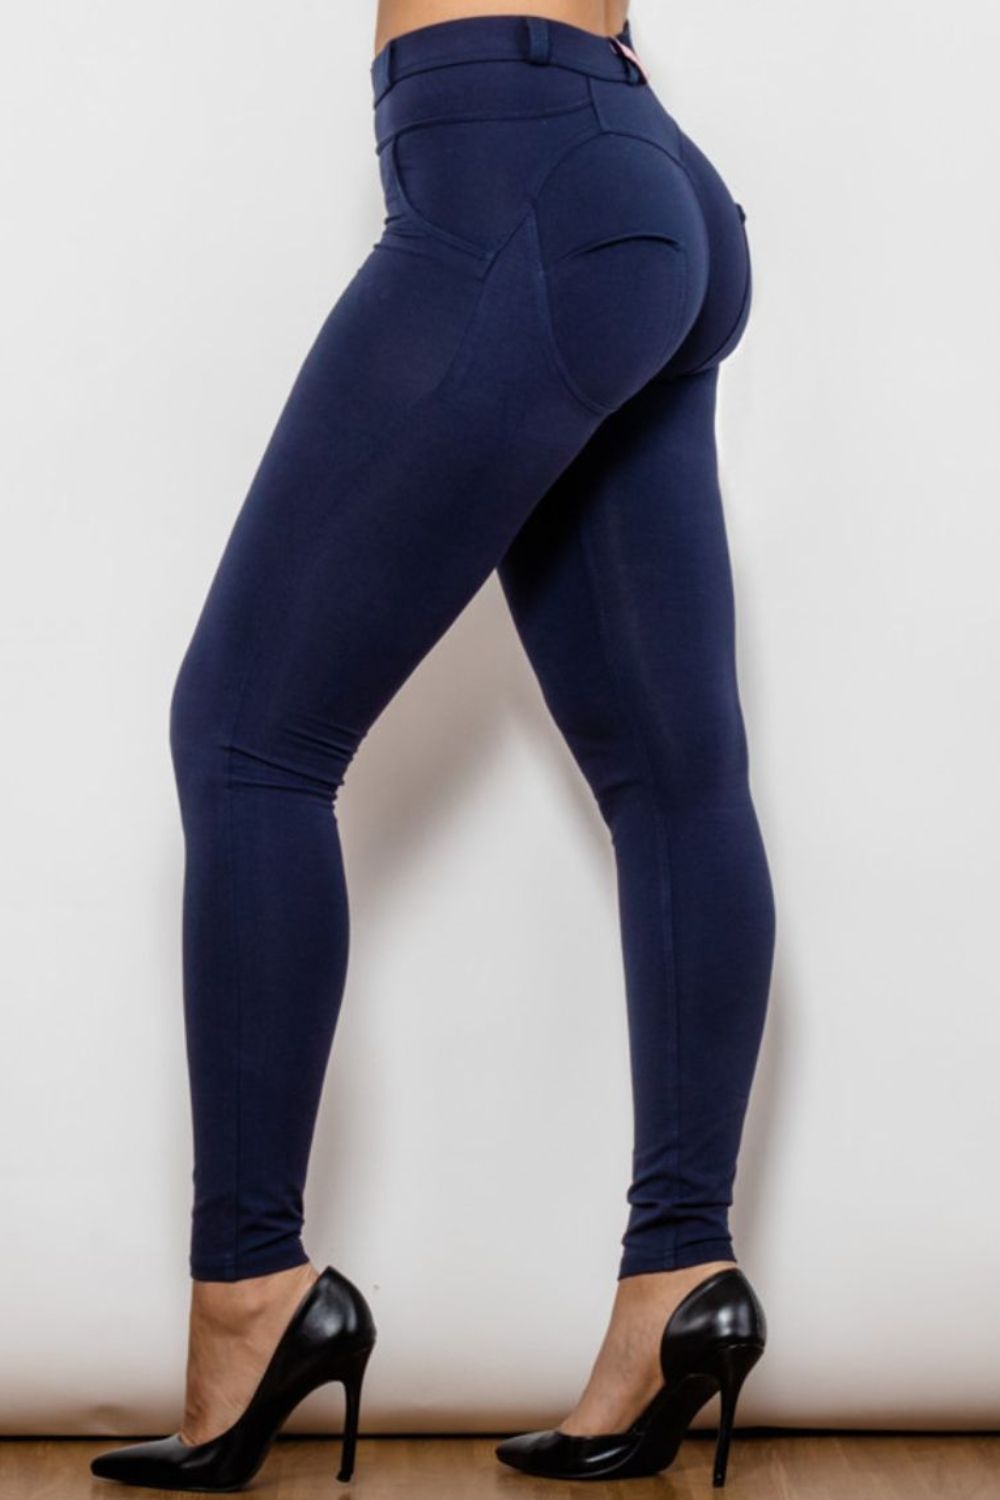 Buttoned Skinny Long Jeans - Navy